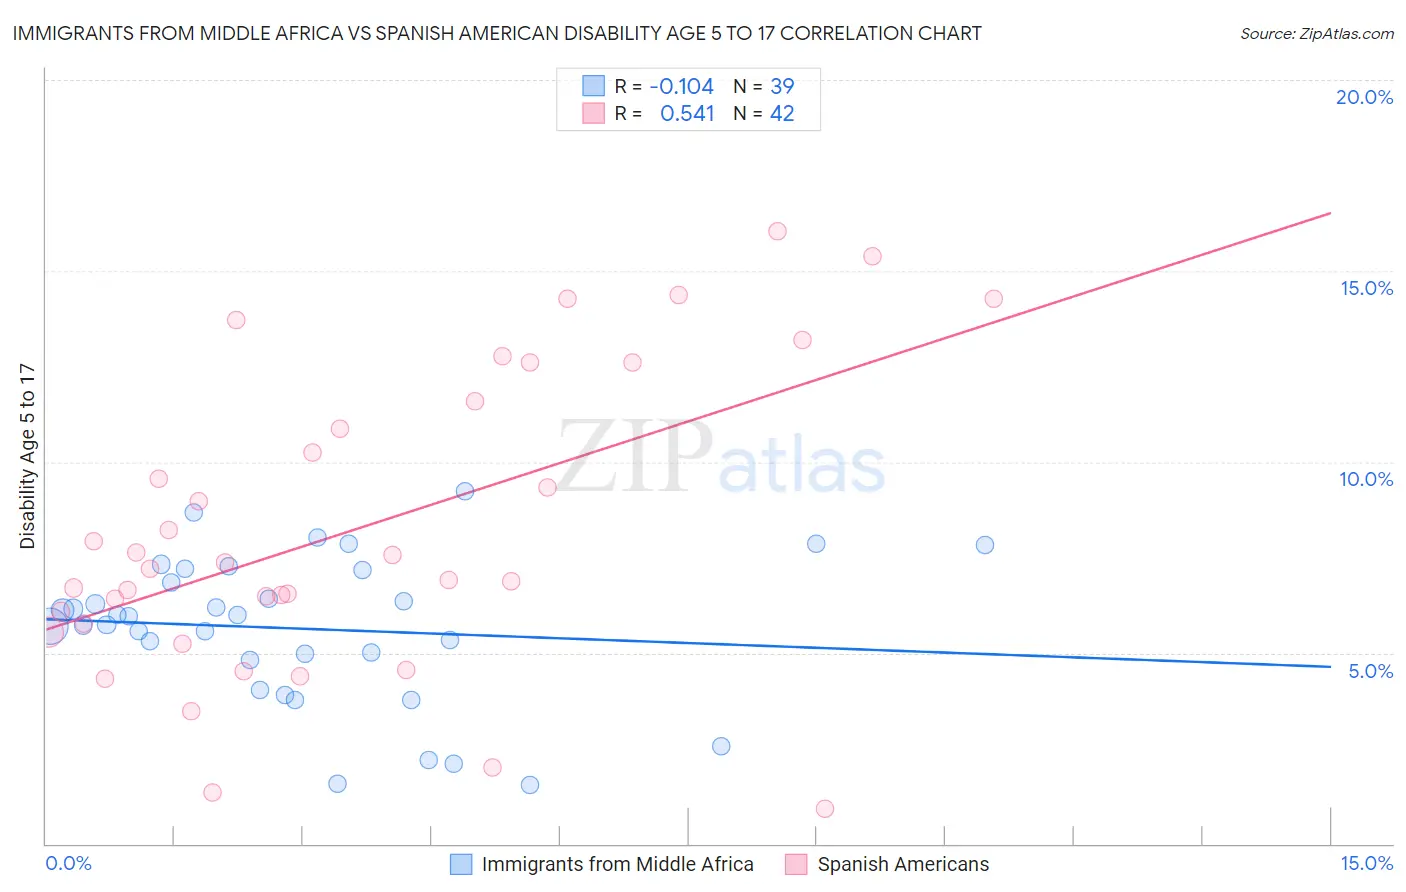 Immigrants from Middle Africa vs Spanish American Disability Age 5 to 17